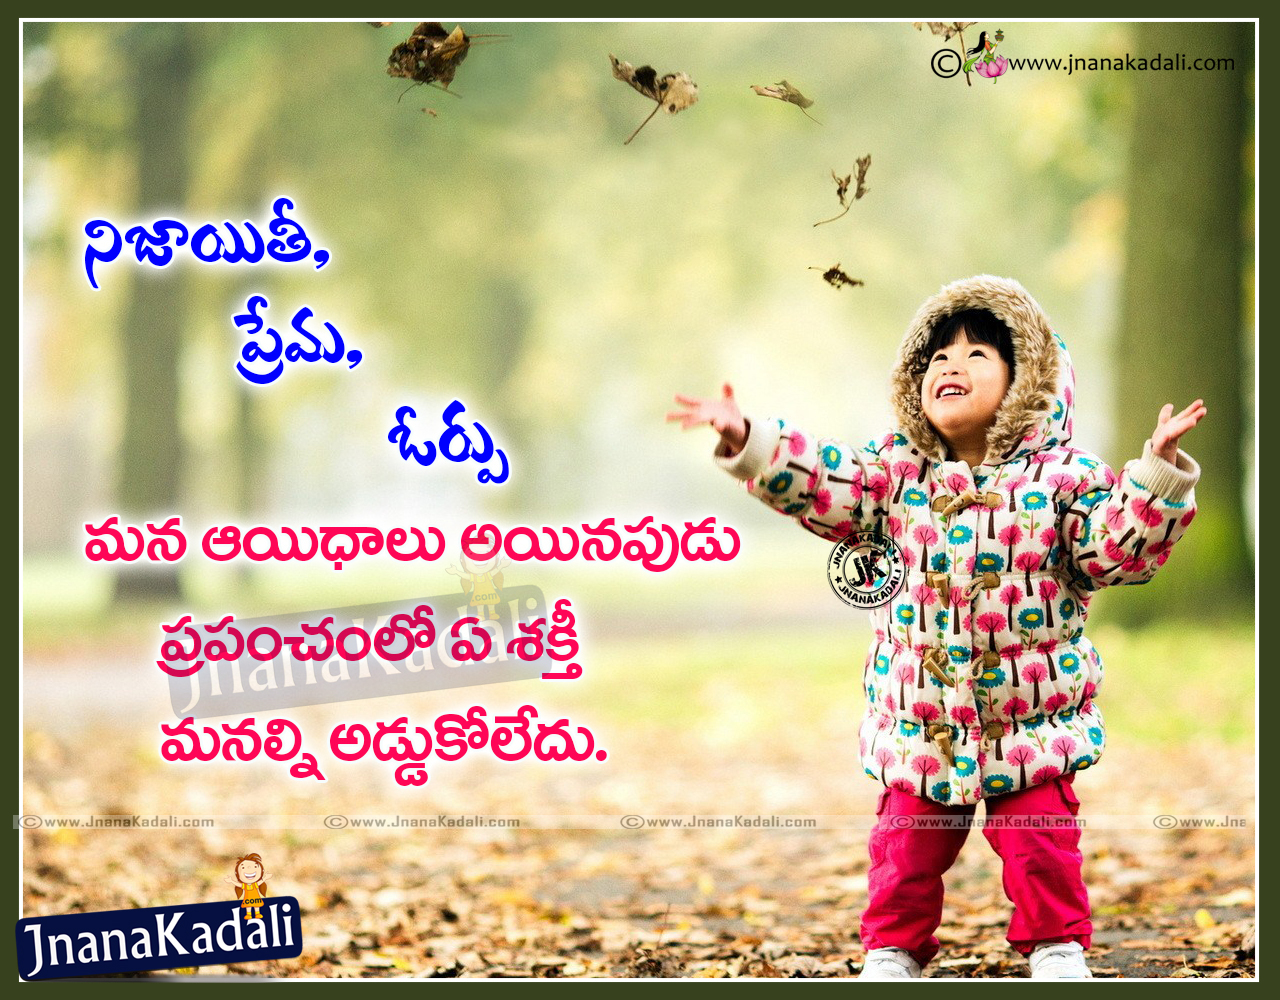 Here is inspirational life quotes in telugu inspirational quotes on life challenges in telugu